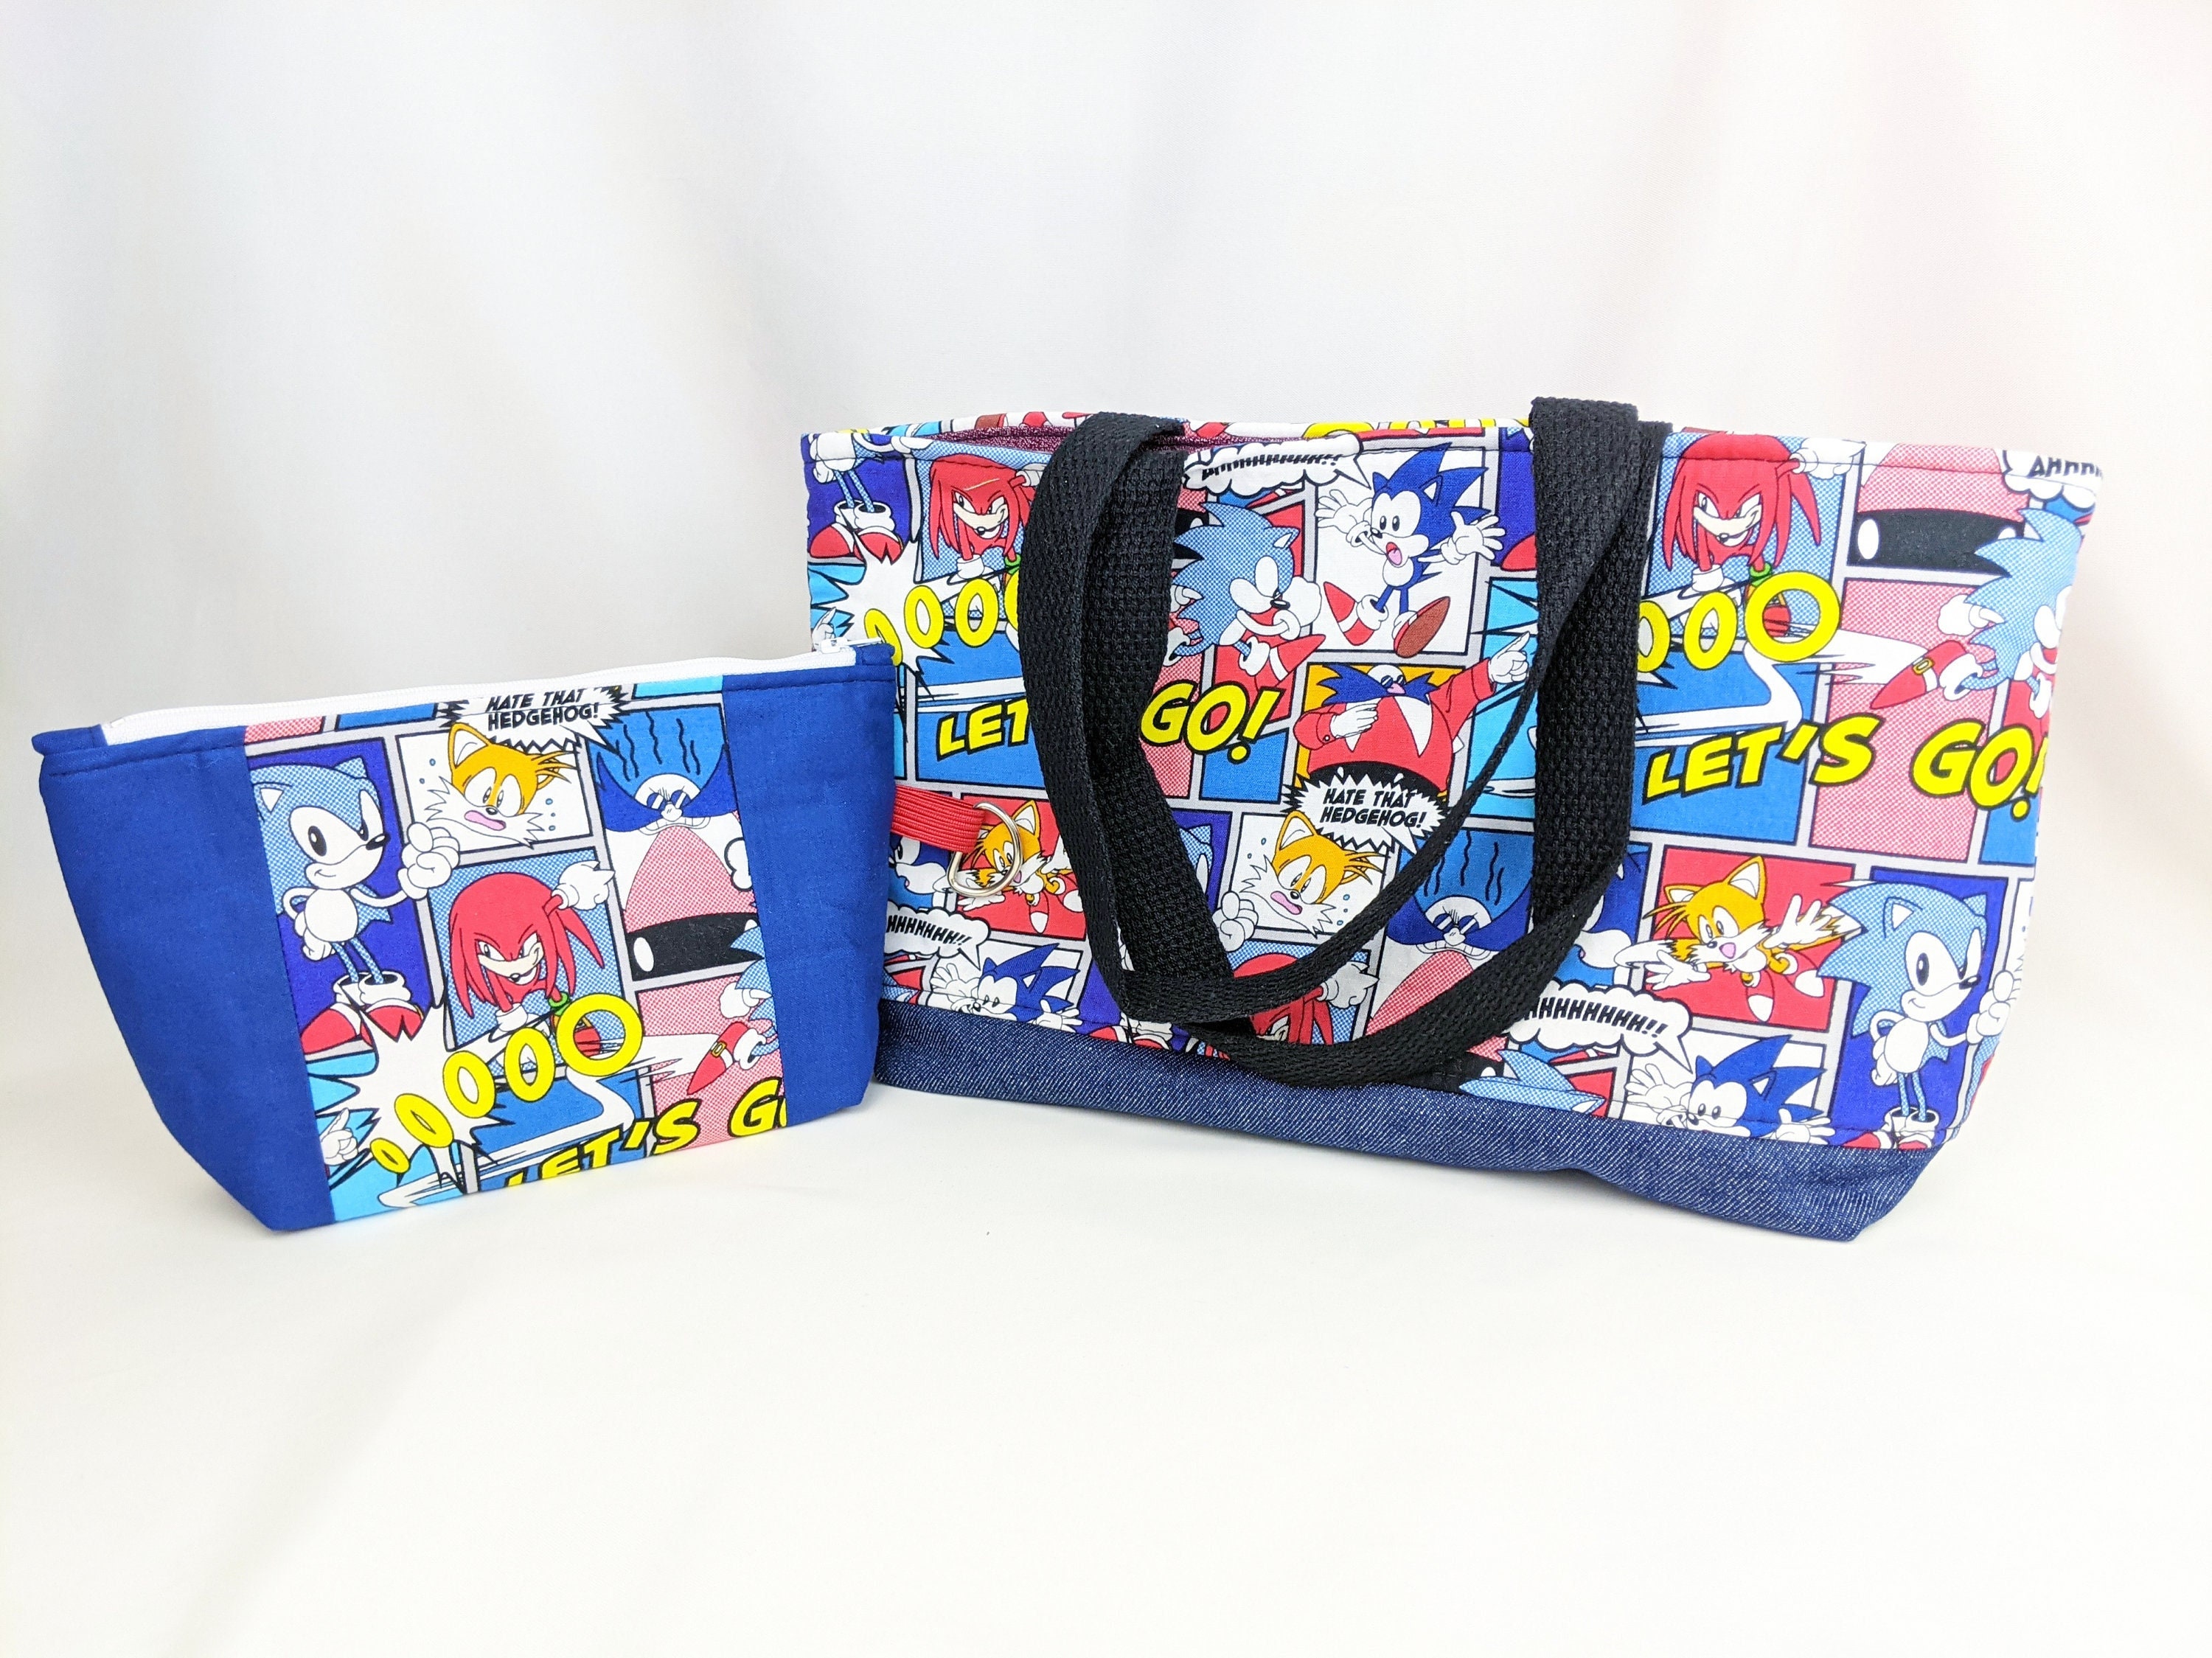 Sonic The Hedgehog Kids Lunch Box Raised Character Insulated Lunch Bag Tote  Blue